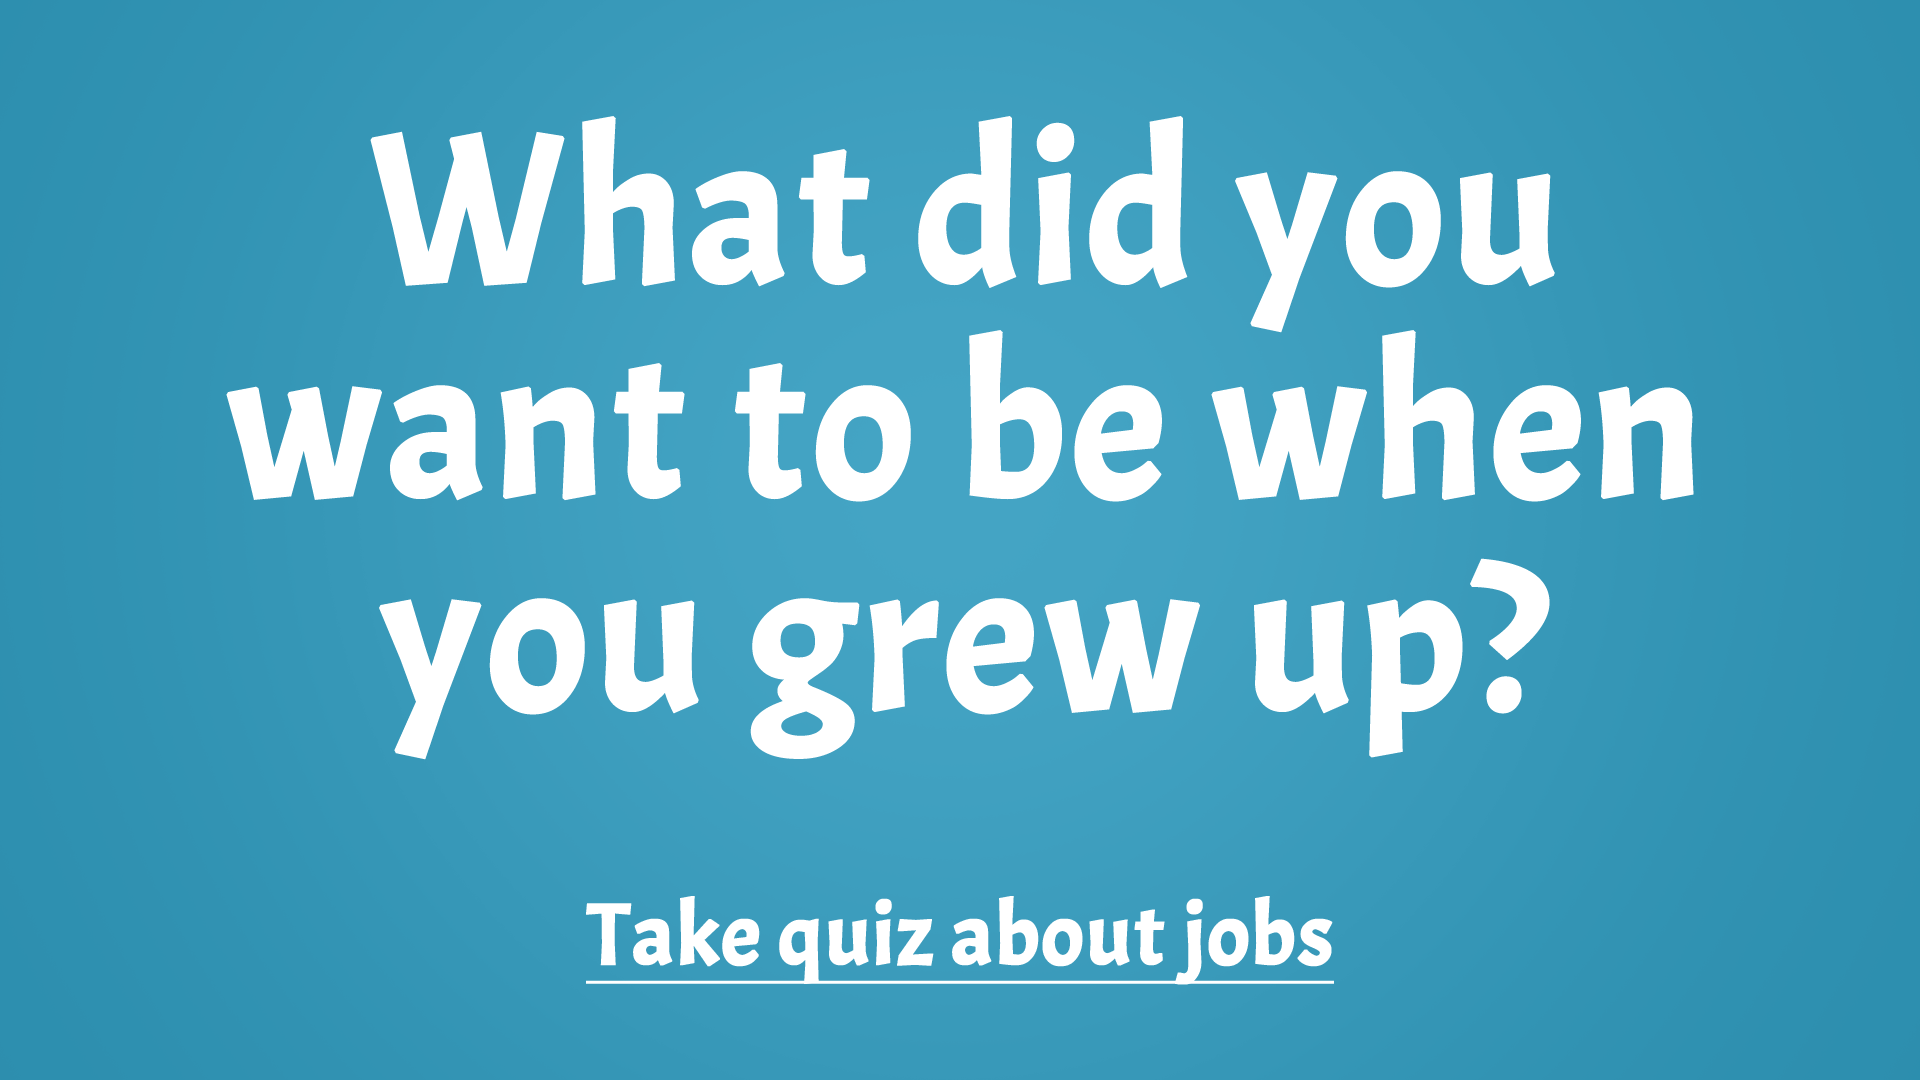 A quiz about jobs